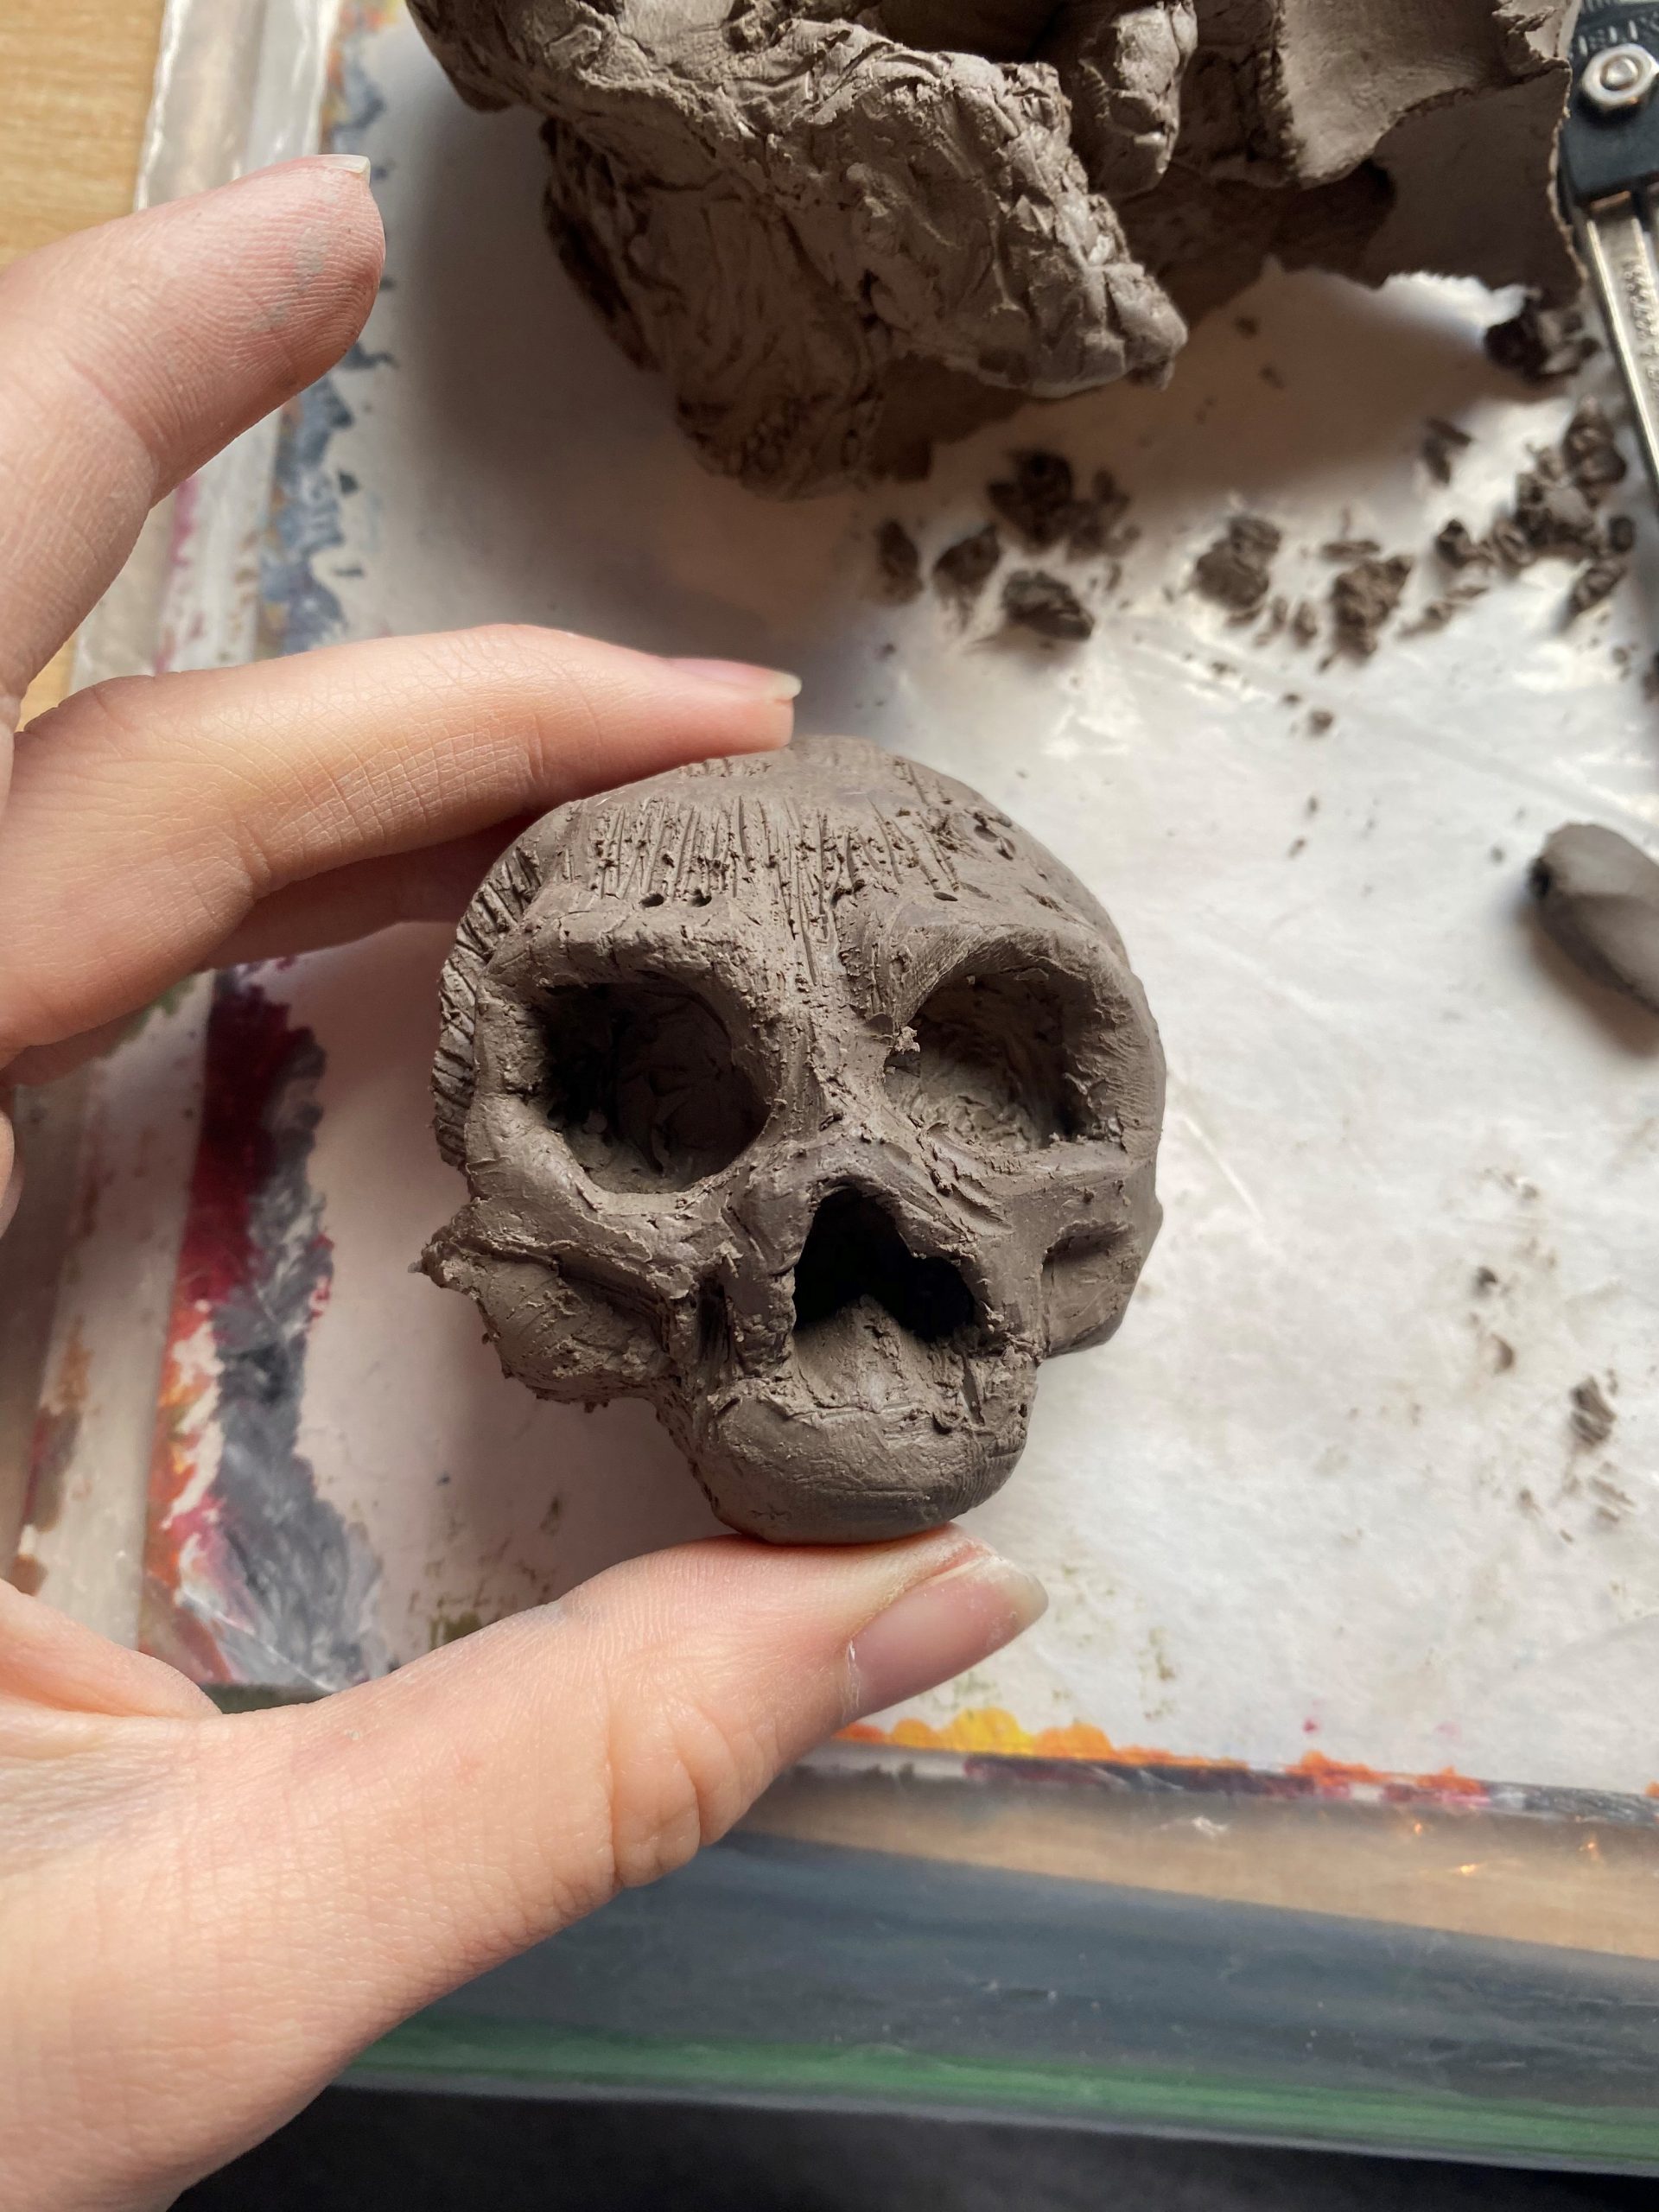 Sculpture – making a little skull (human) out of clay